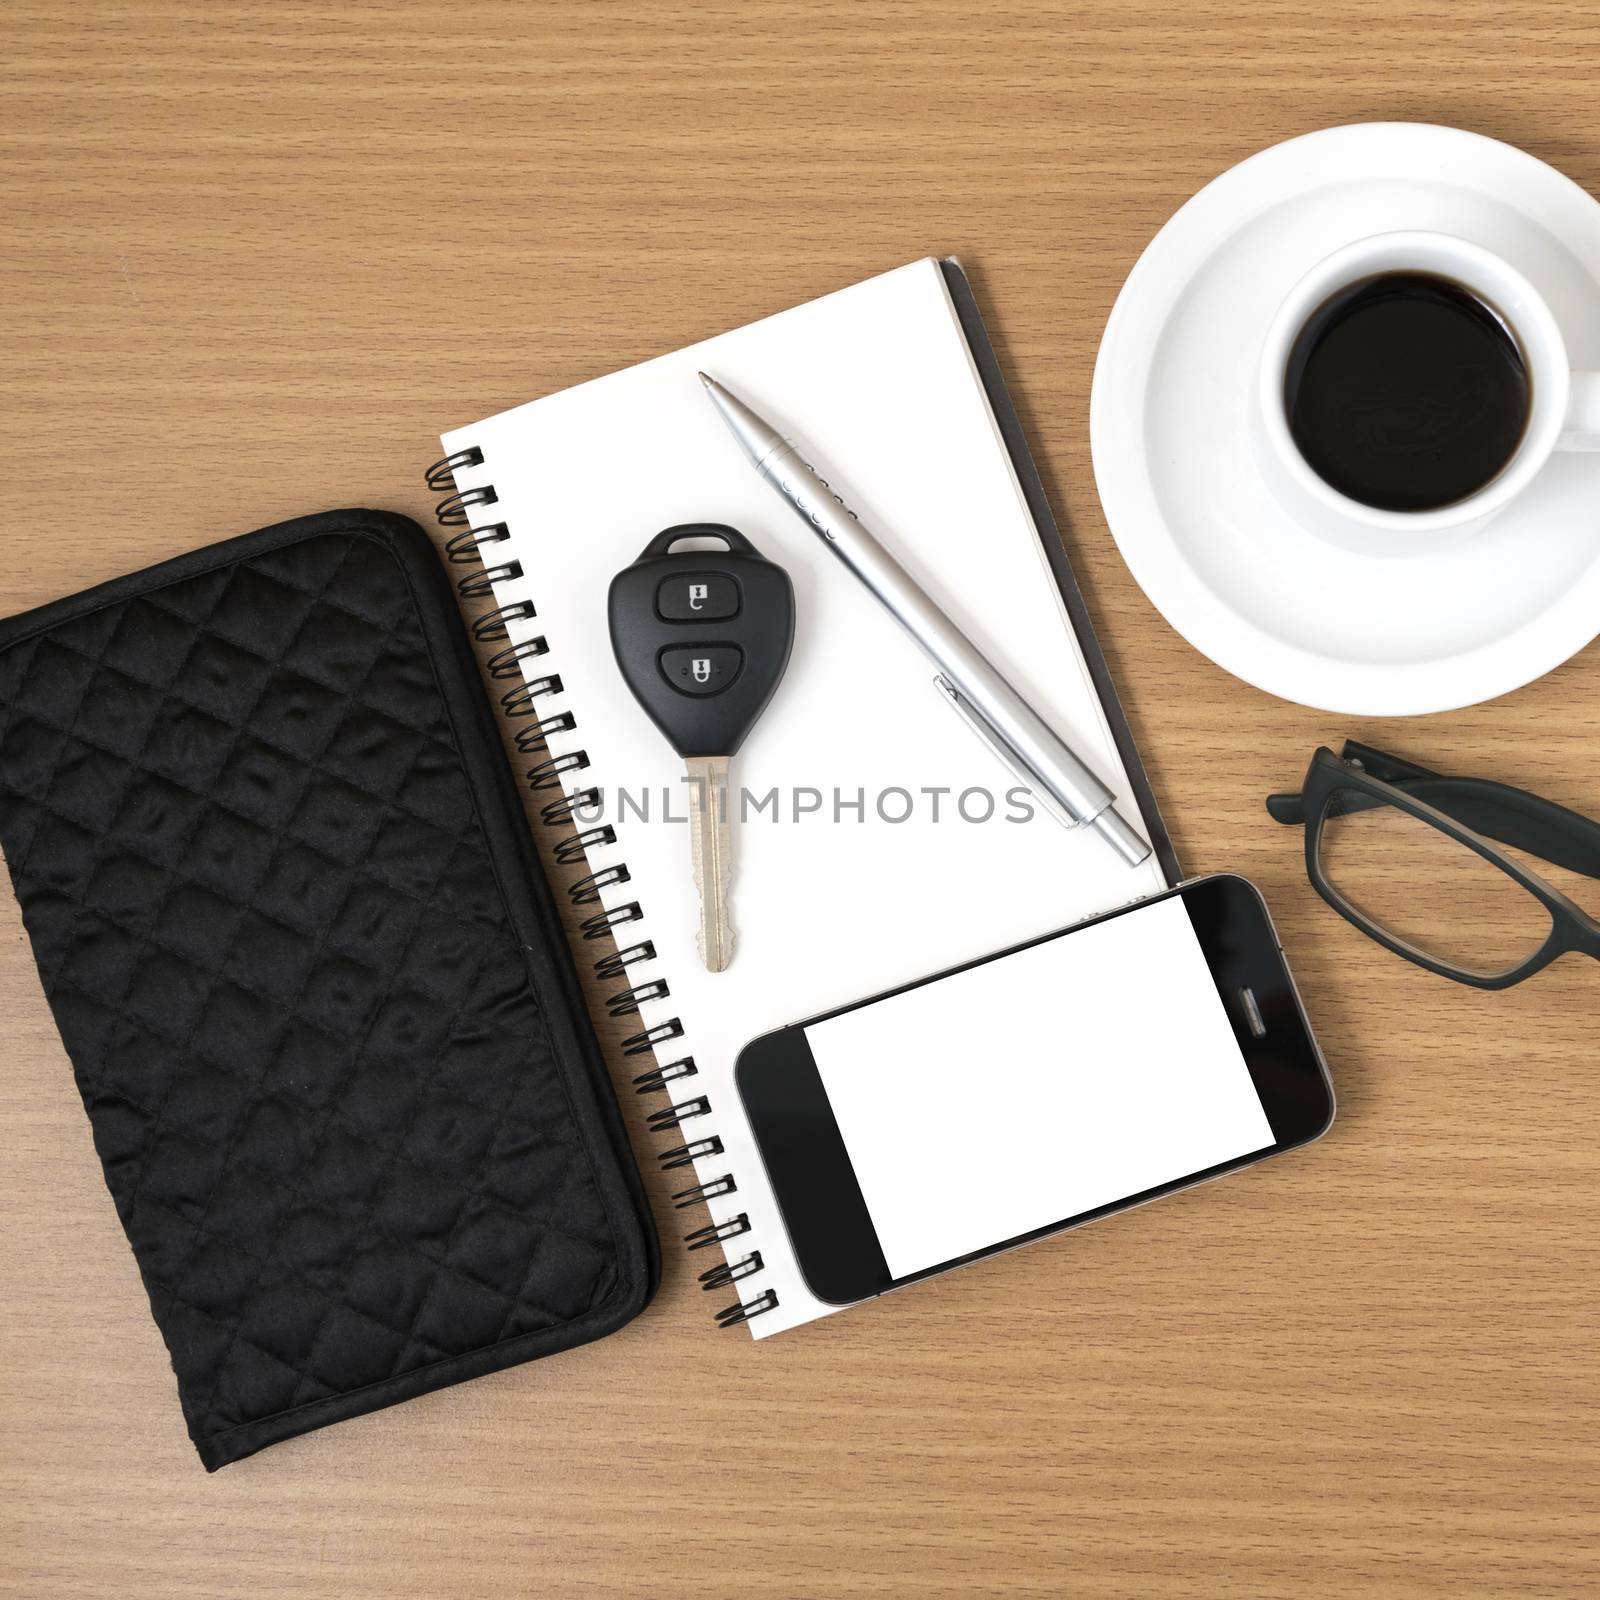 coffee and phone with notepad,car key,eyeglasses and wallet by ammza12